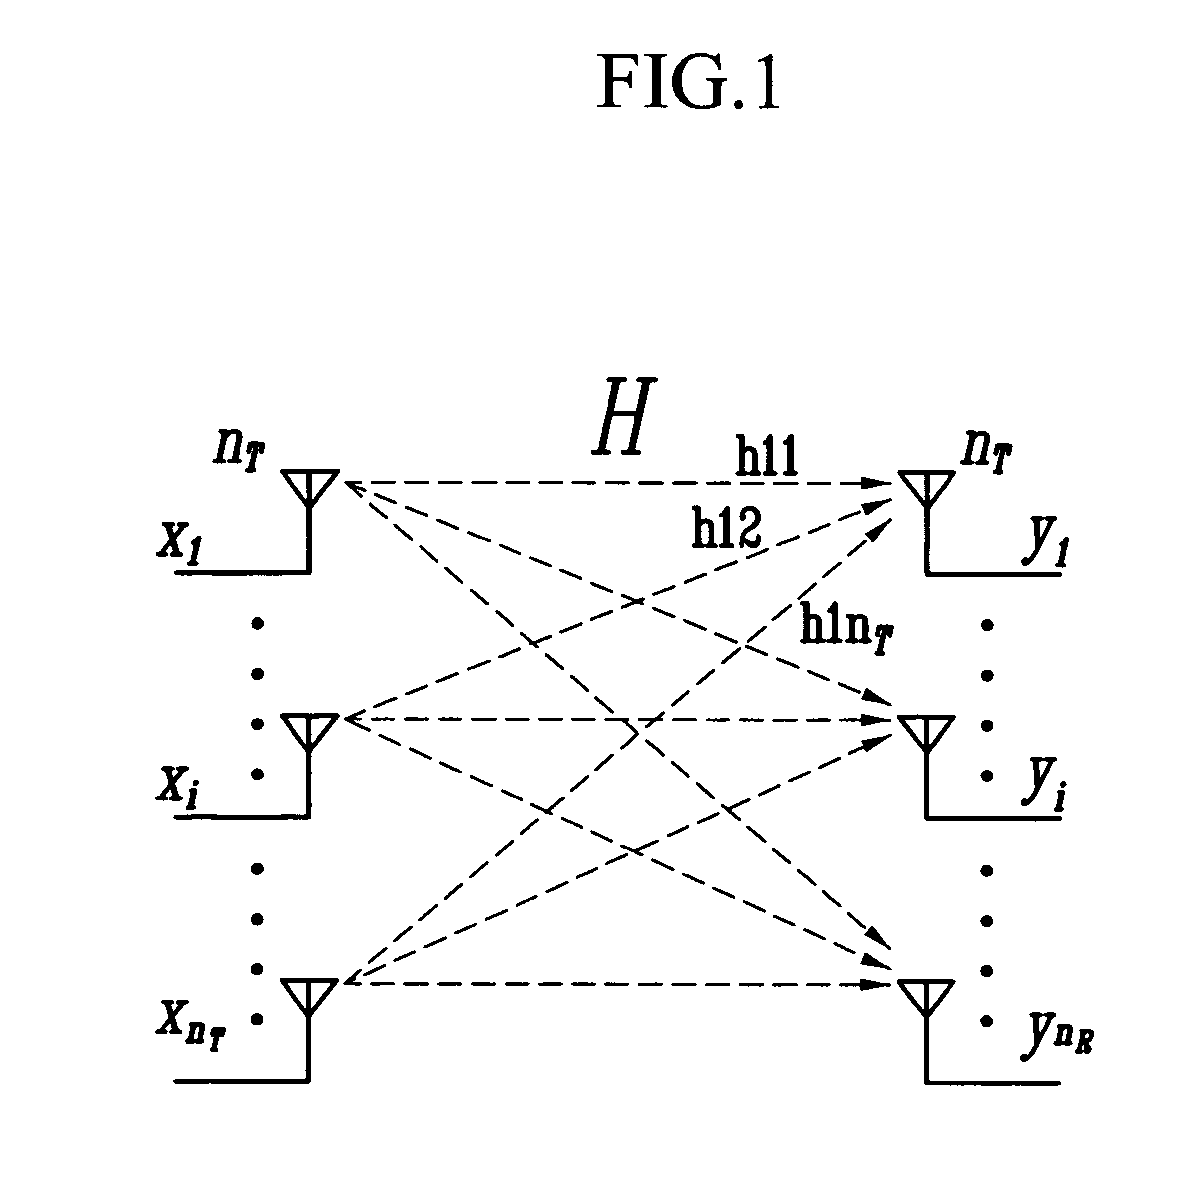 Method for increasing accuracy for estimating MIMO channel